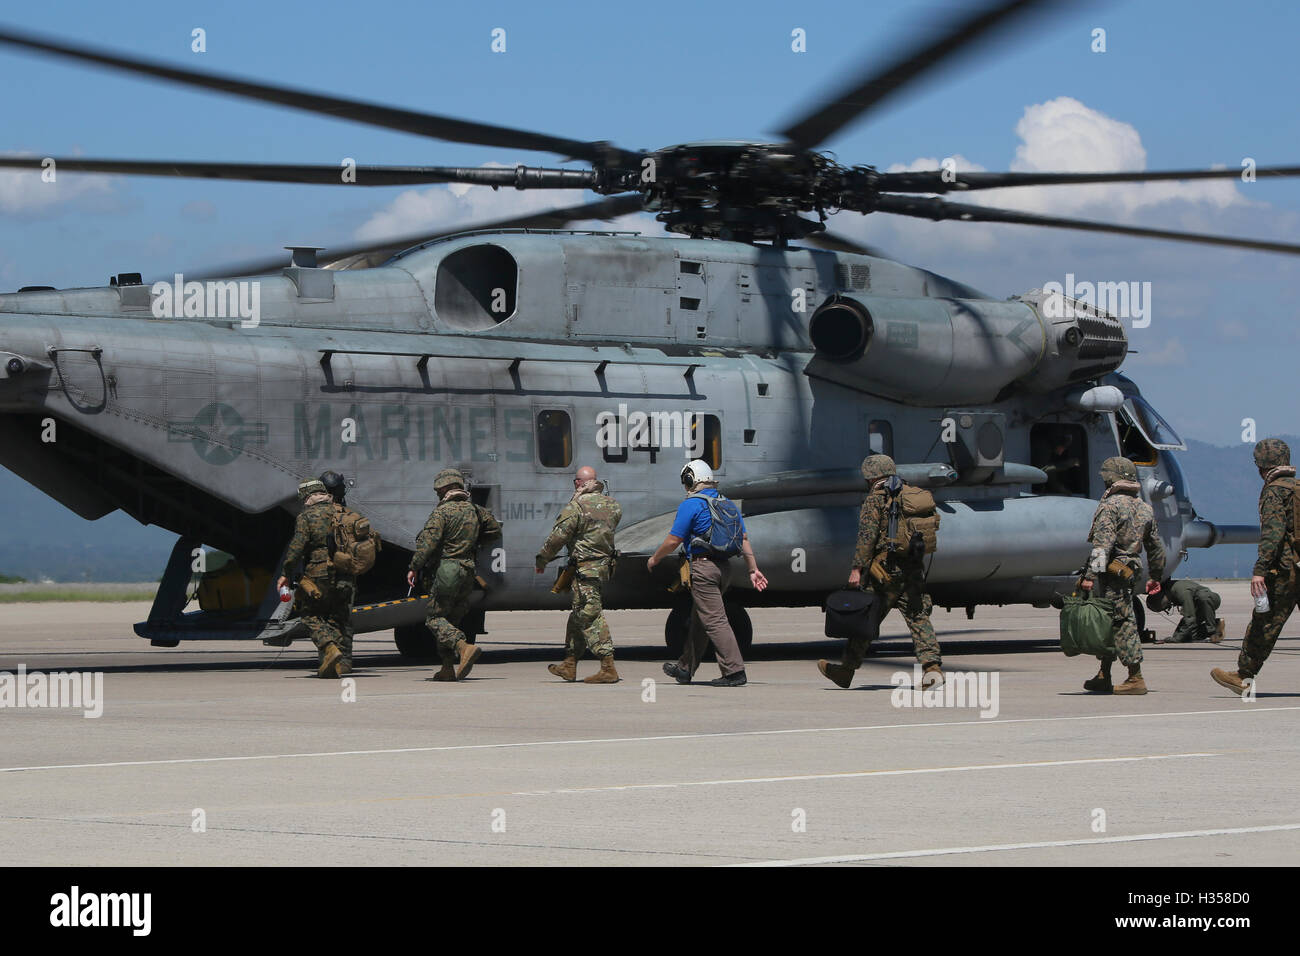 Soto Cano Air Base, Honduras. 4th October, 2016. U.S. Marines board a CH-53E Super Stallion helicopter to Grand Cayman Island to assist in relief efforts following the aftermath of Hurricane Matthew October 4, 2016 in Soto Cano Air Base, Honduras. Hurricane Matthew was a Category 4 storm that slammed into the central Caribbean causing widespread damage. Stock Photo